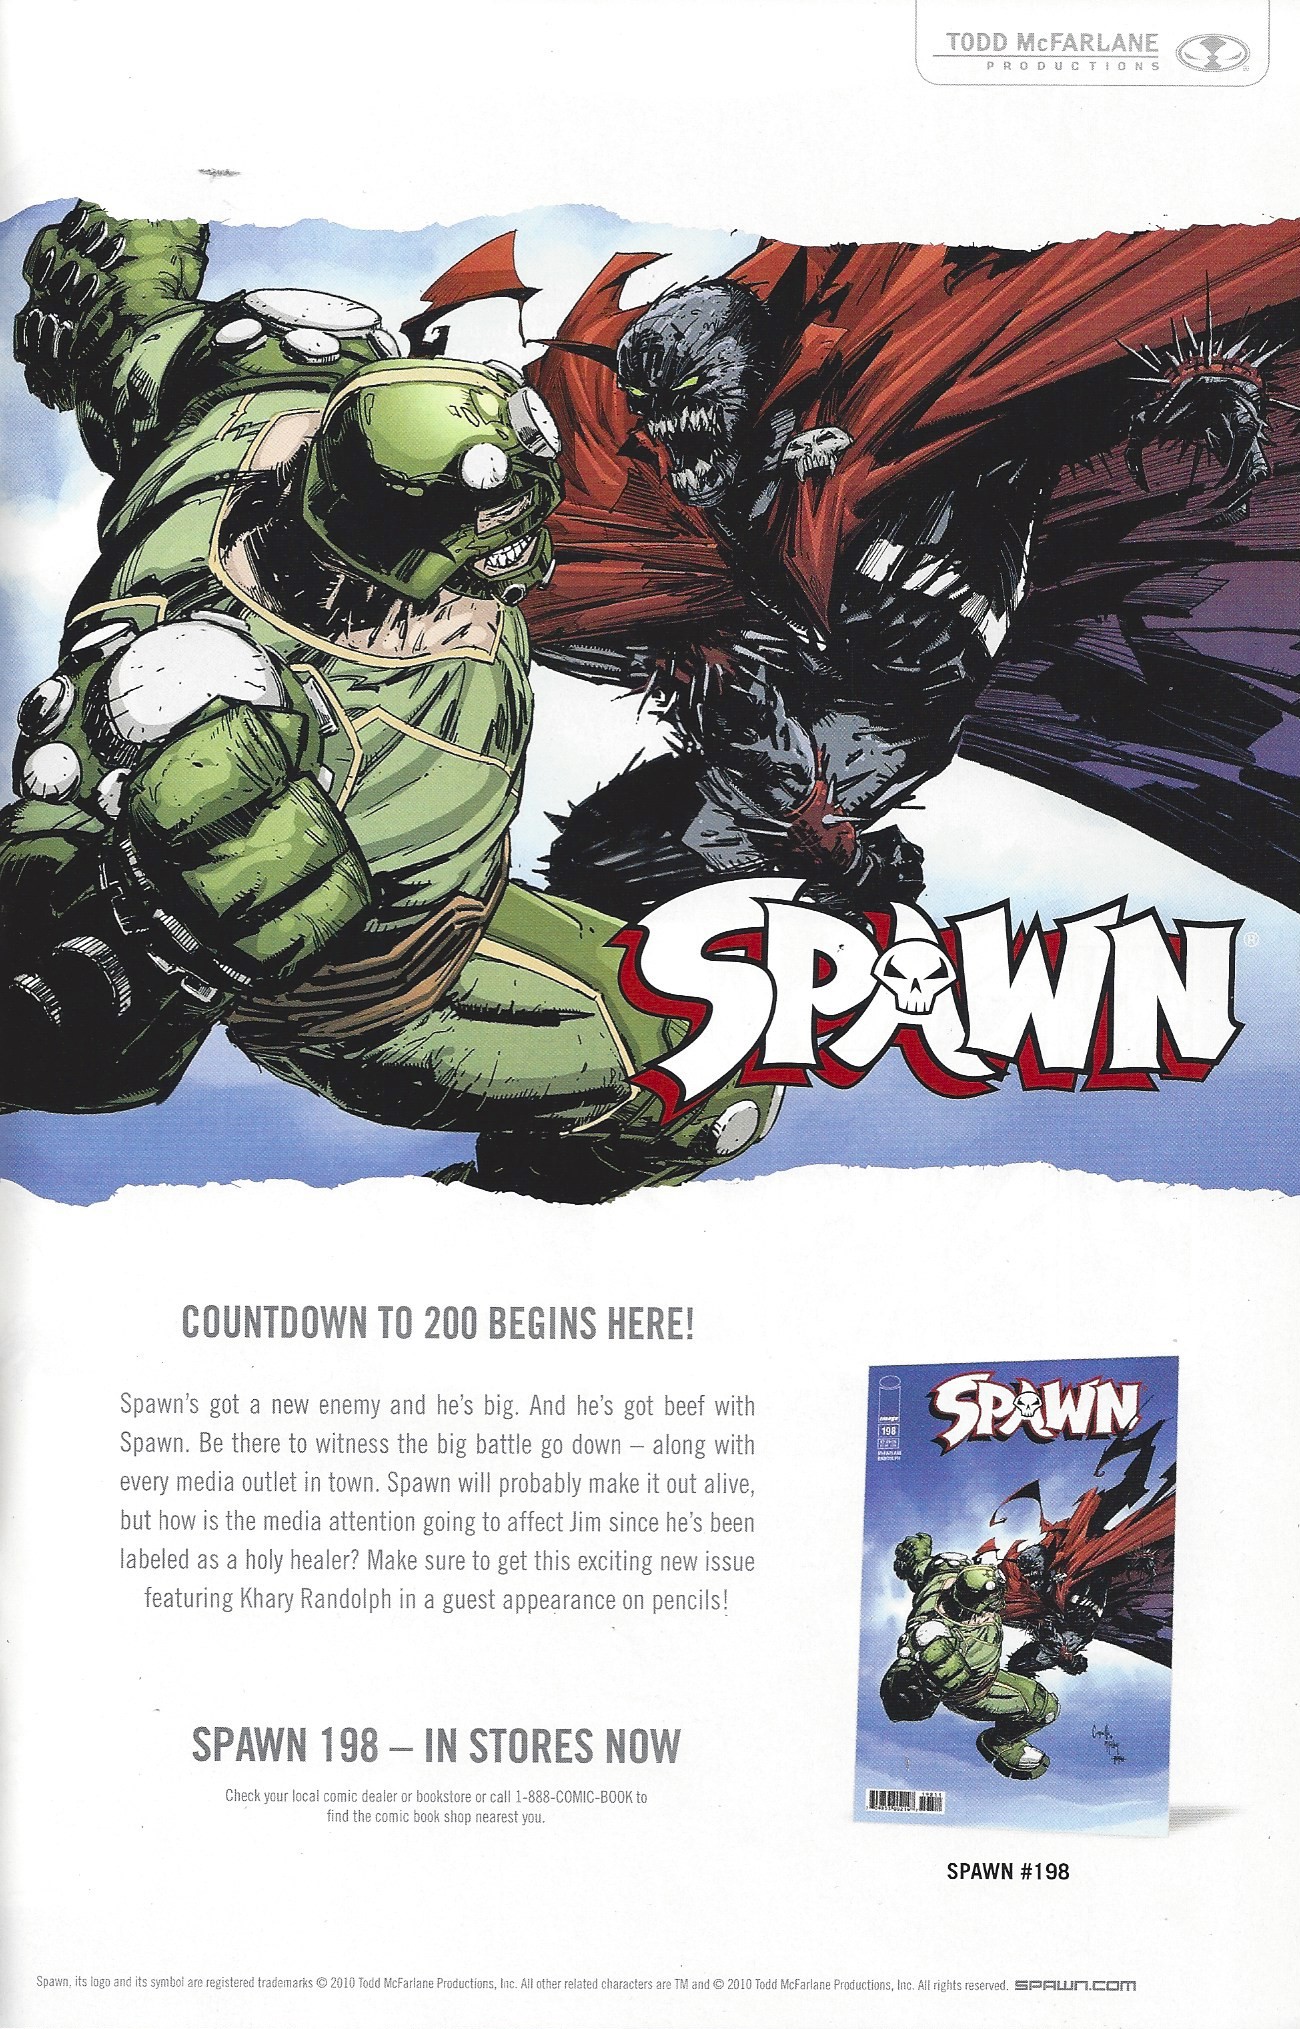 Daily Spawn Archive On Twitter Countdown To Begins Here A Comic Book Ad For Spawn